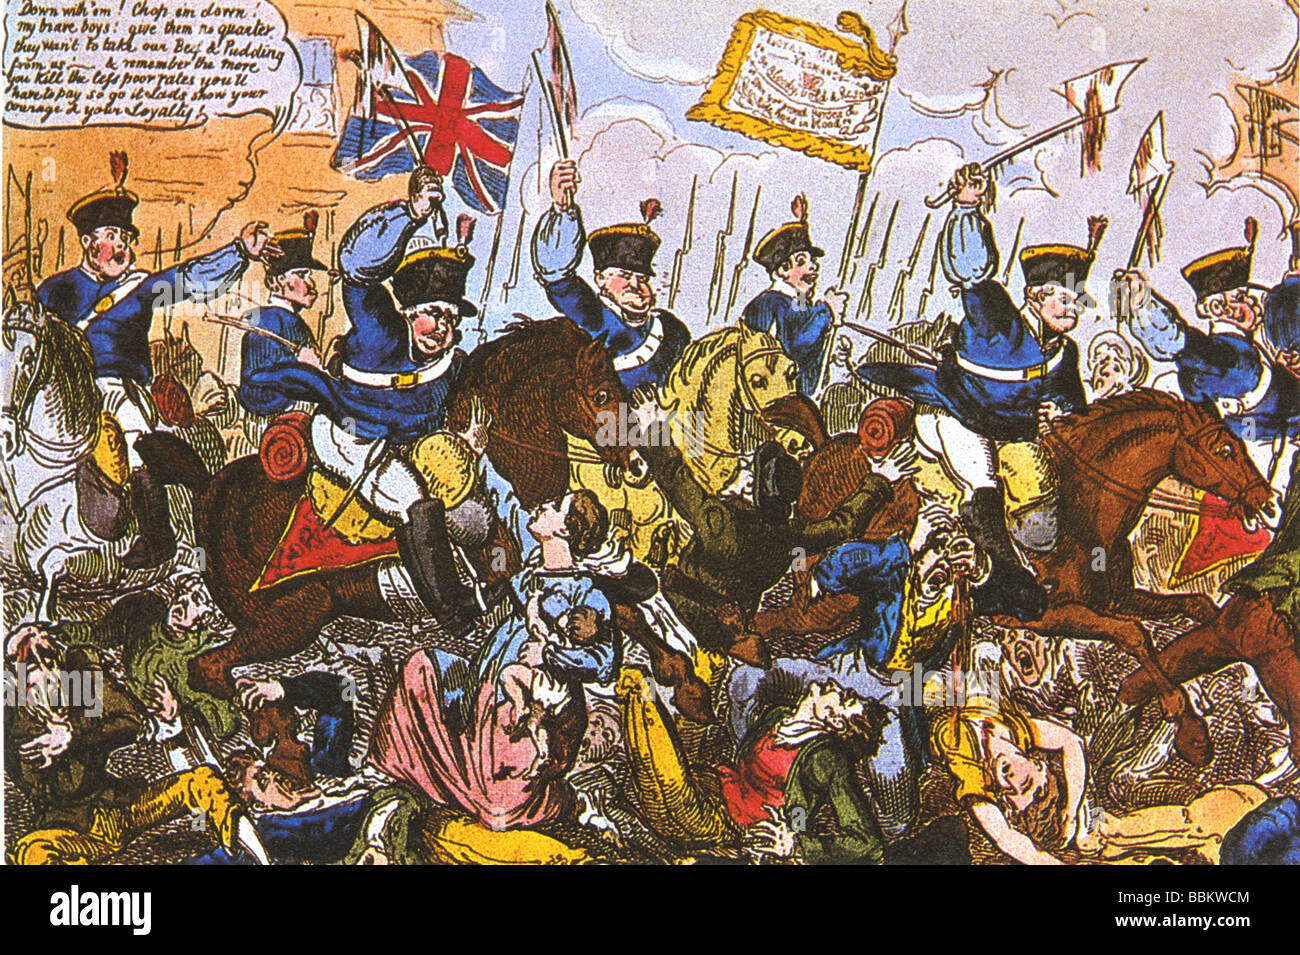 PETERLOO MASSACRE at St Peters Fields, Manchester, UK on 16 August 1819 as shown in a contemporary satirical cartoon Stock Photo